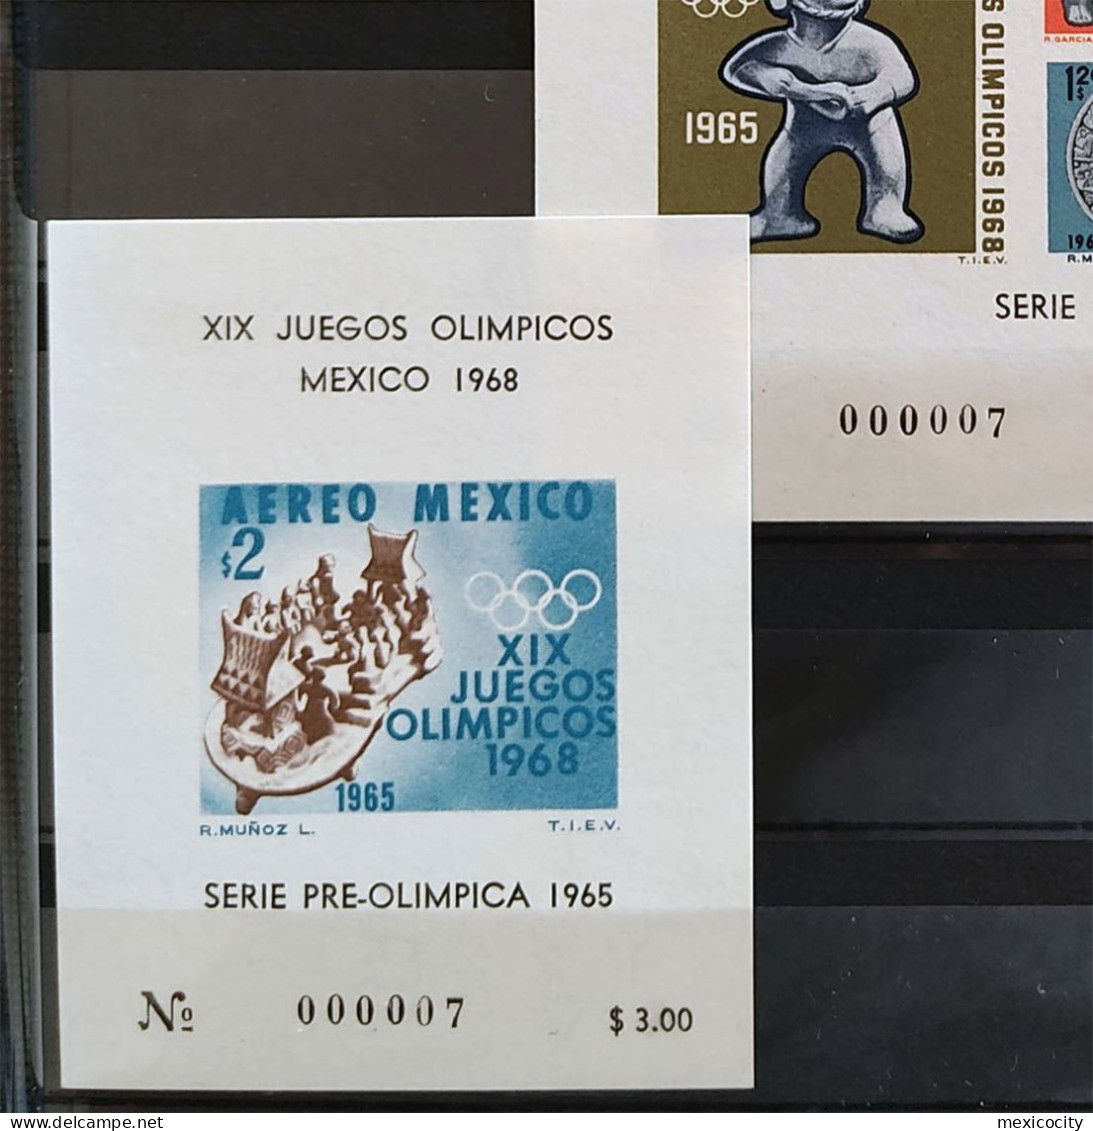 MEXICO 1965 OLYMPIC GAMES MATCHED SHEETS # 000007 Number On Each + UNIQUE Thus MNG As Issued - Mexico